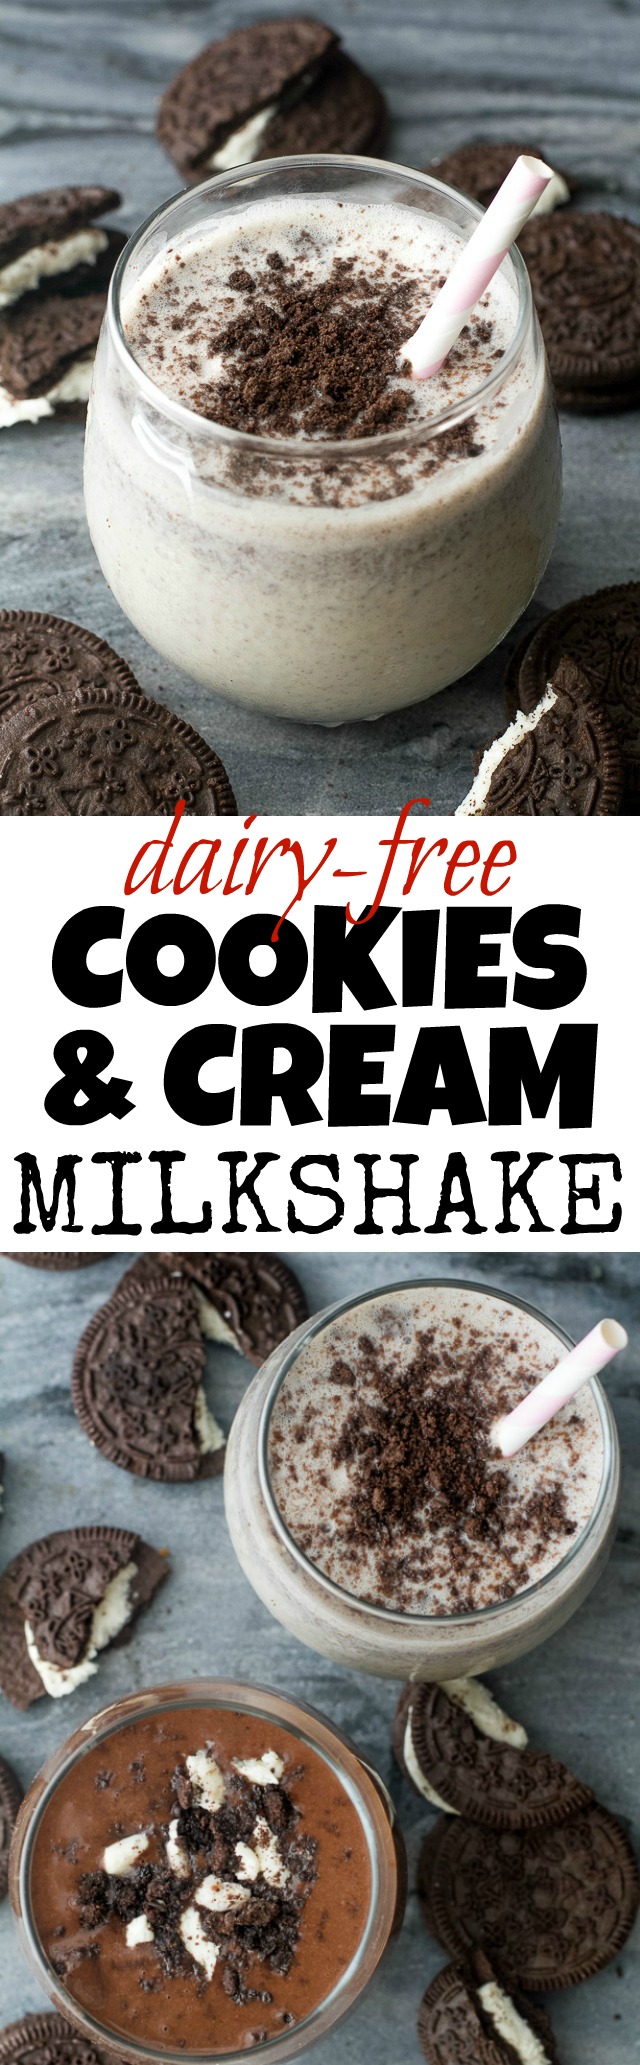 Dairy-Free Cookies & Cream Milkshake - so ridiculously rich and creamy that you'd never it was vegan. The perfect summer treat with a little boost of nutrition and a chocolate option too! | runningwithspoons.com #SoDeliciousDairyFree #ad